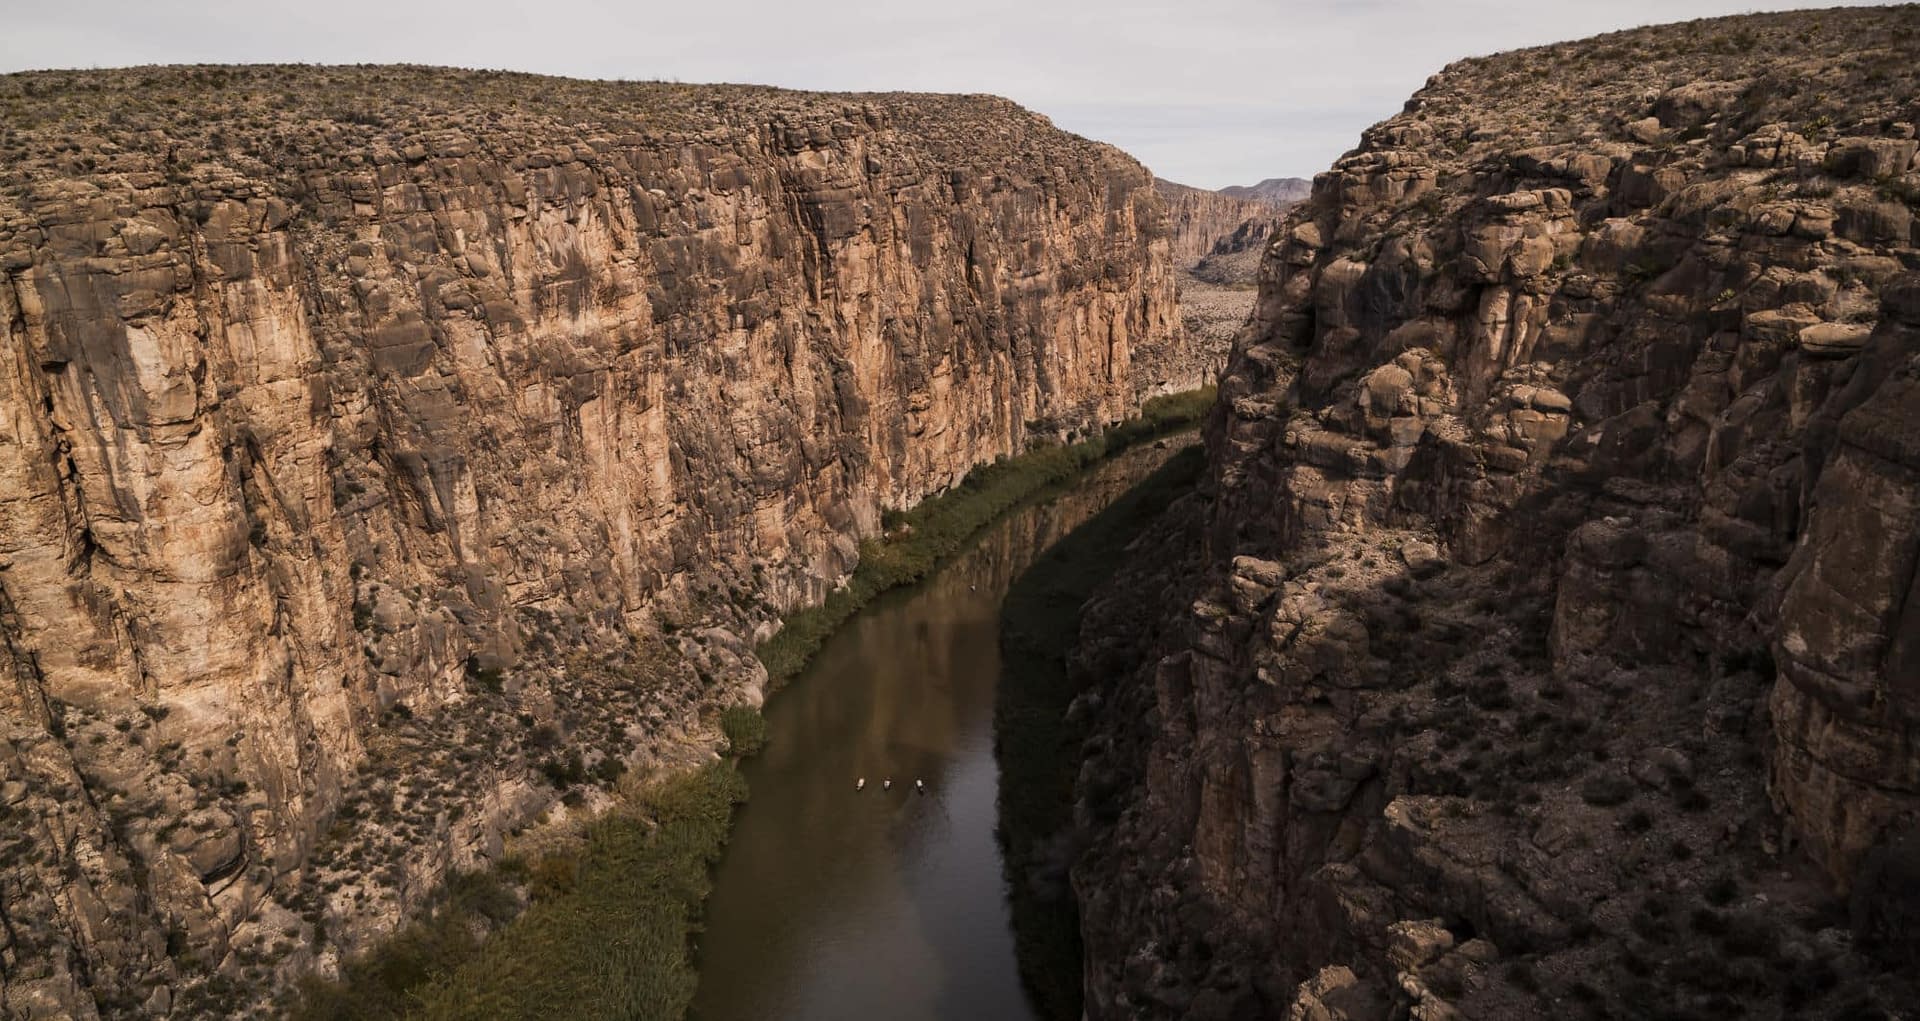 Lower Canyons of the Rio Grande